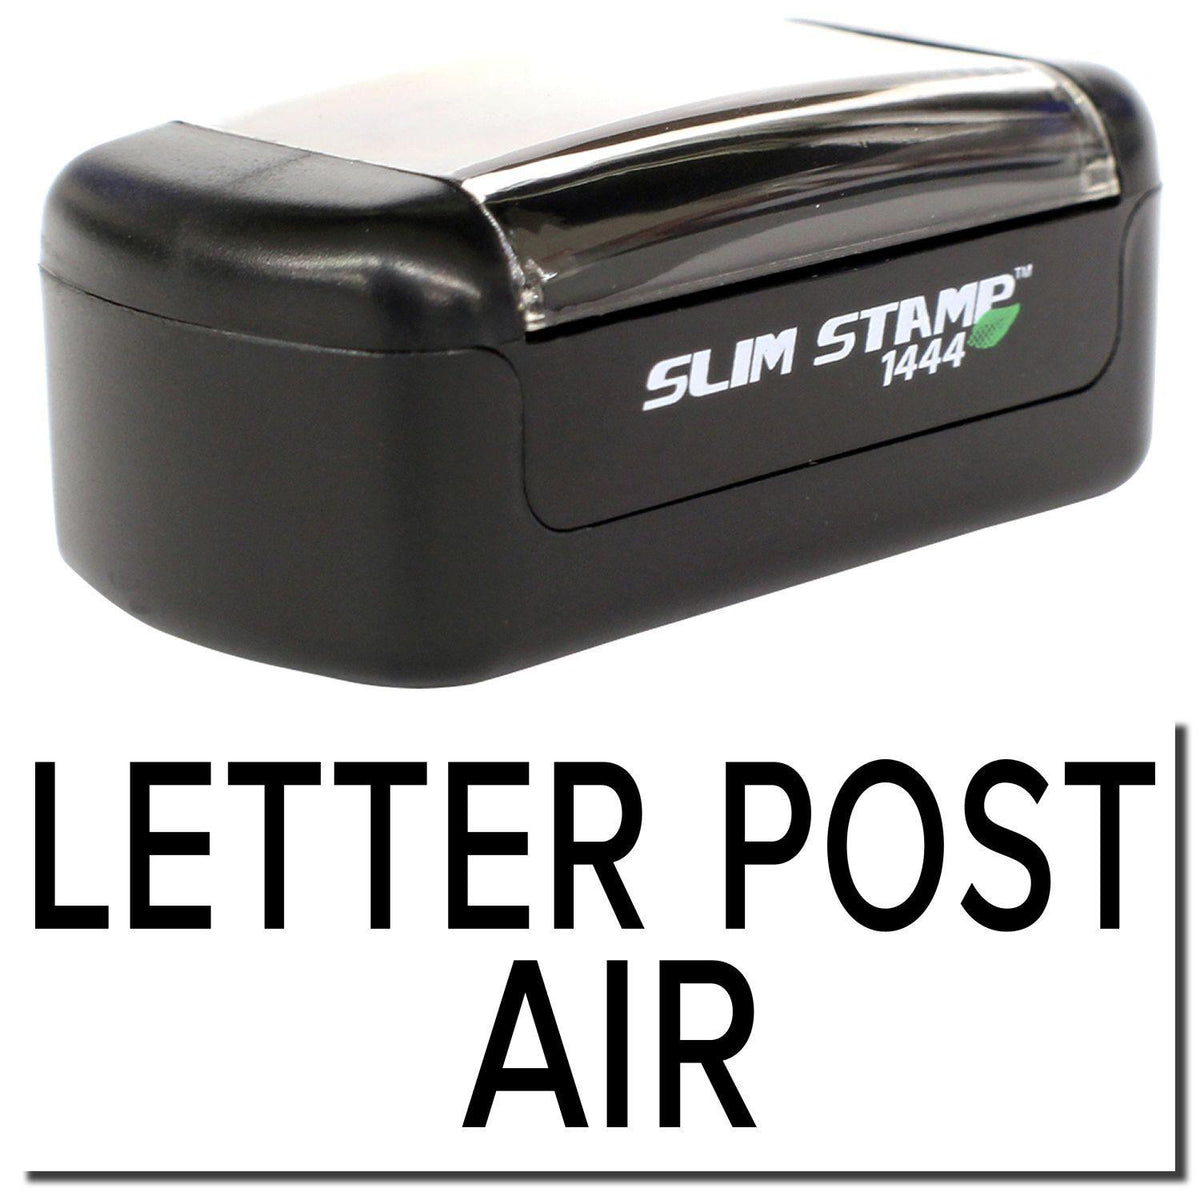 A stock office pre-inked stamp with a stamped image showing how the text &quot;LETTER POST AIR&quot; is displayed after stamping.